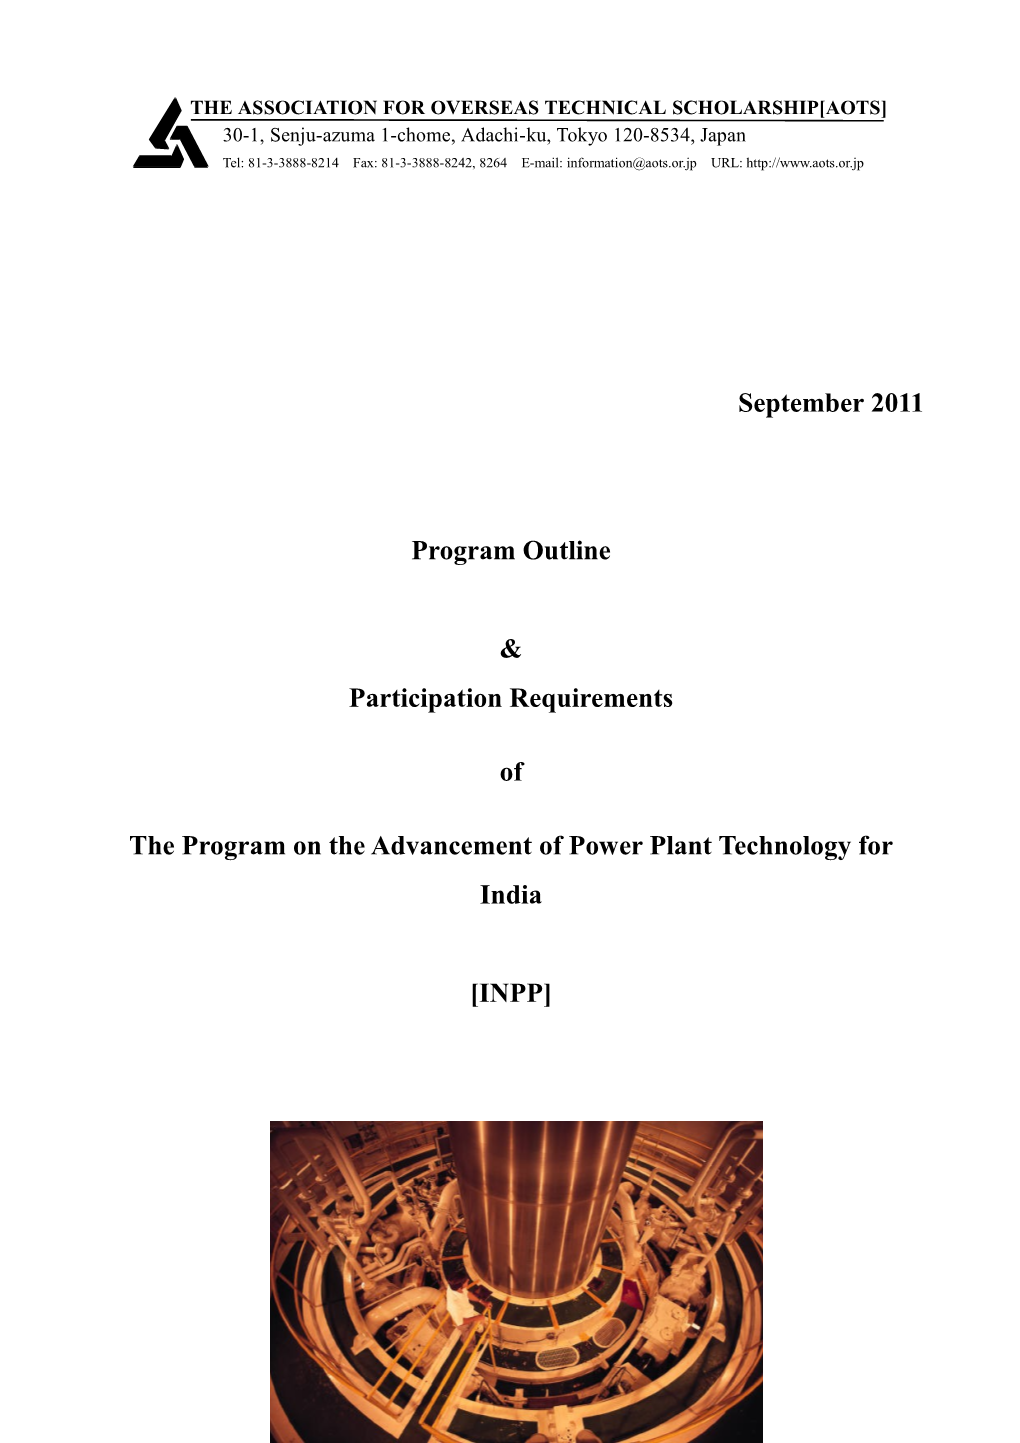 The Program on the Advancement of Power Plant Technology for India (INPP)